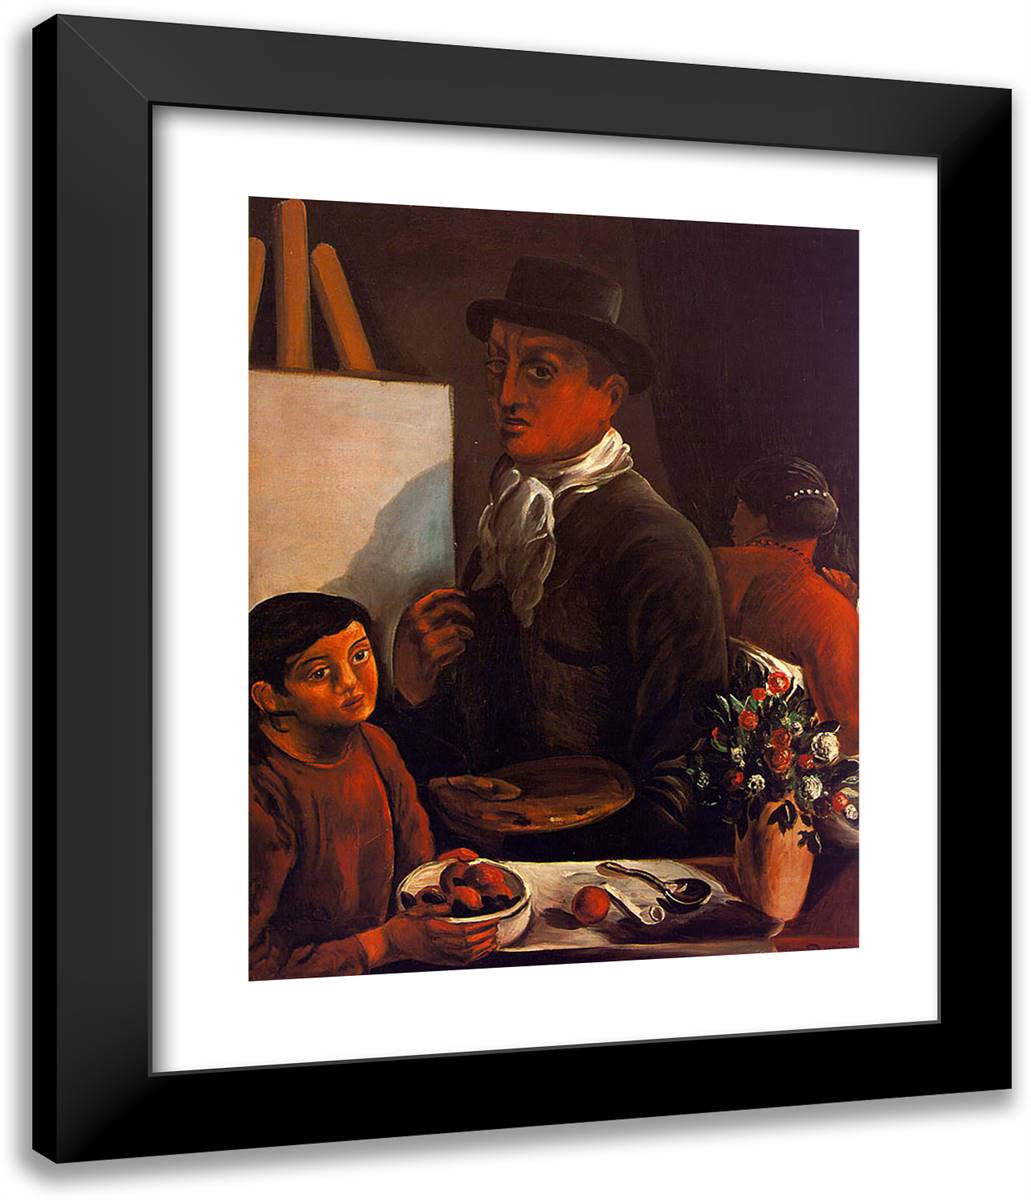 The Artist in His Studio 20x24 Black Modern Wood Framed Art Print Poster by Derain, Andre